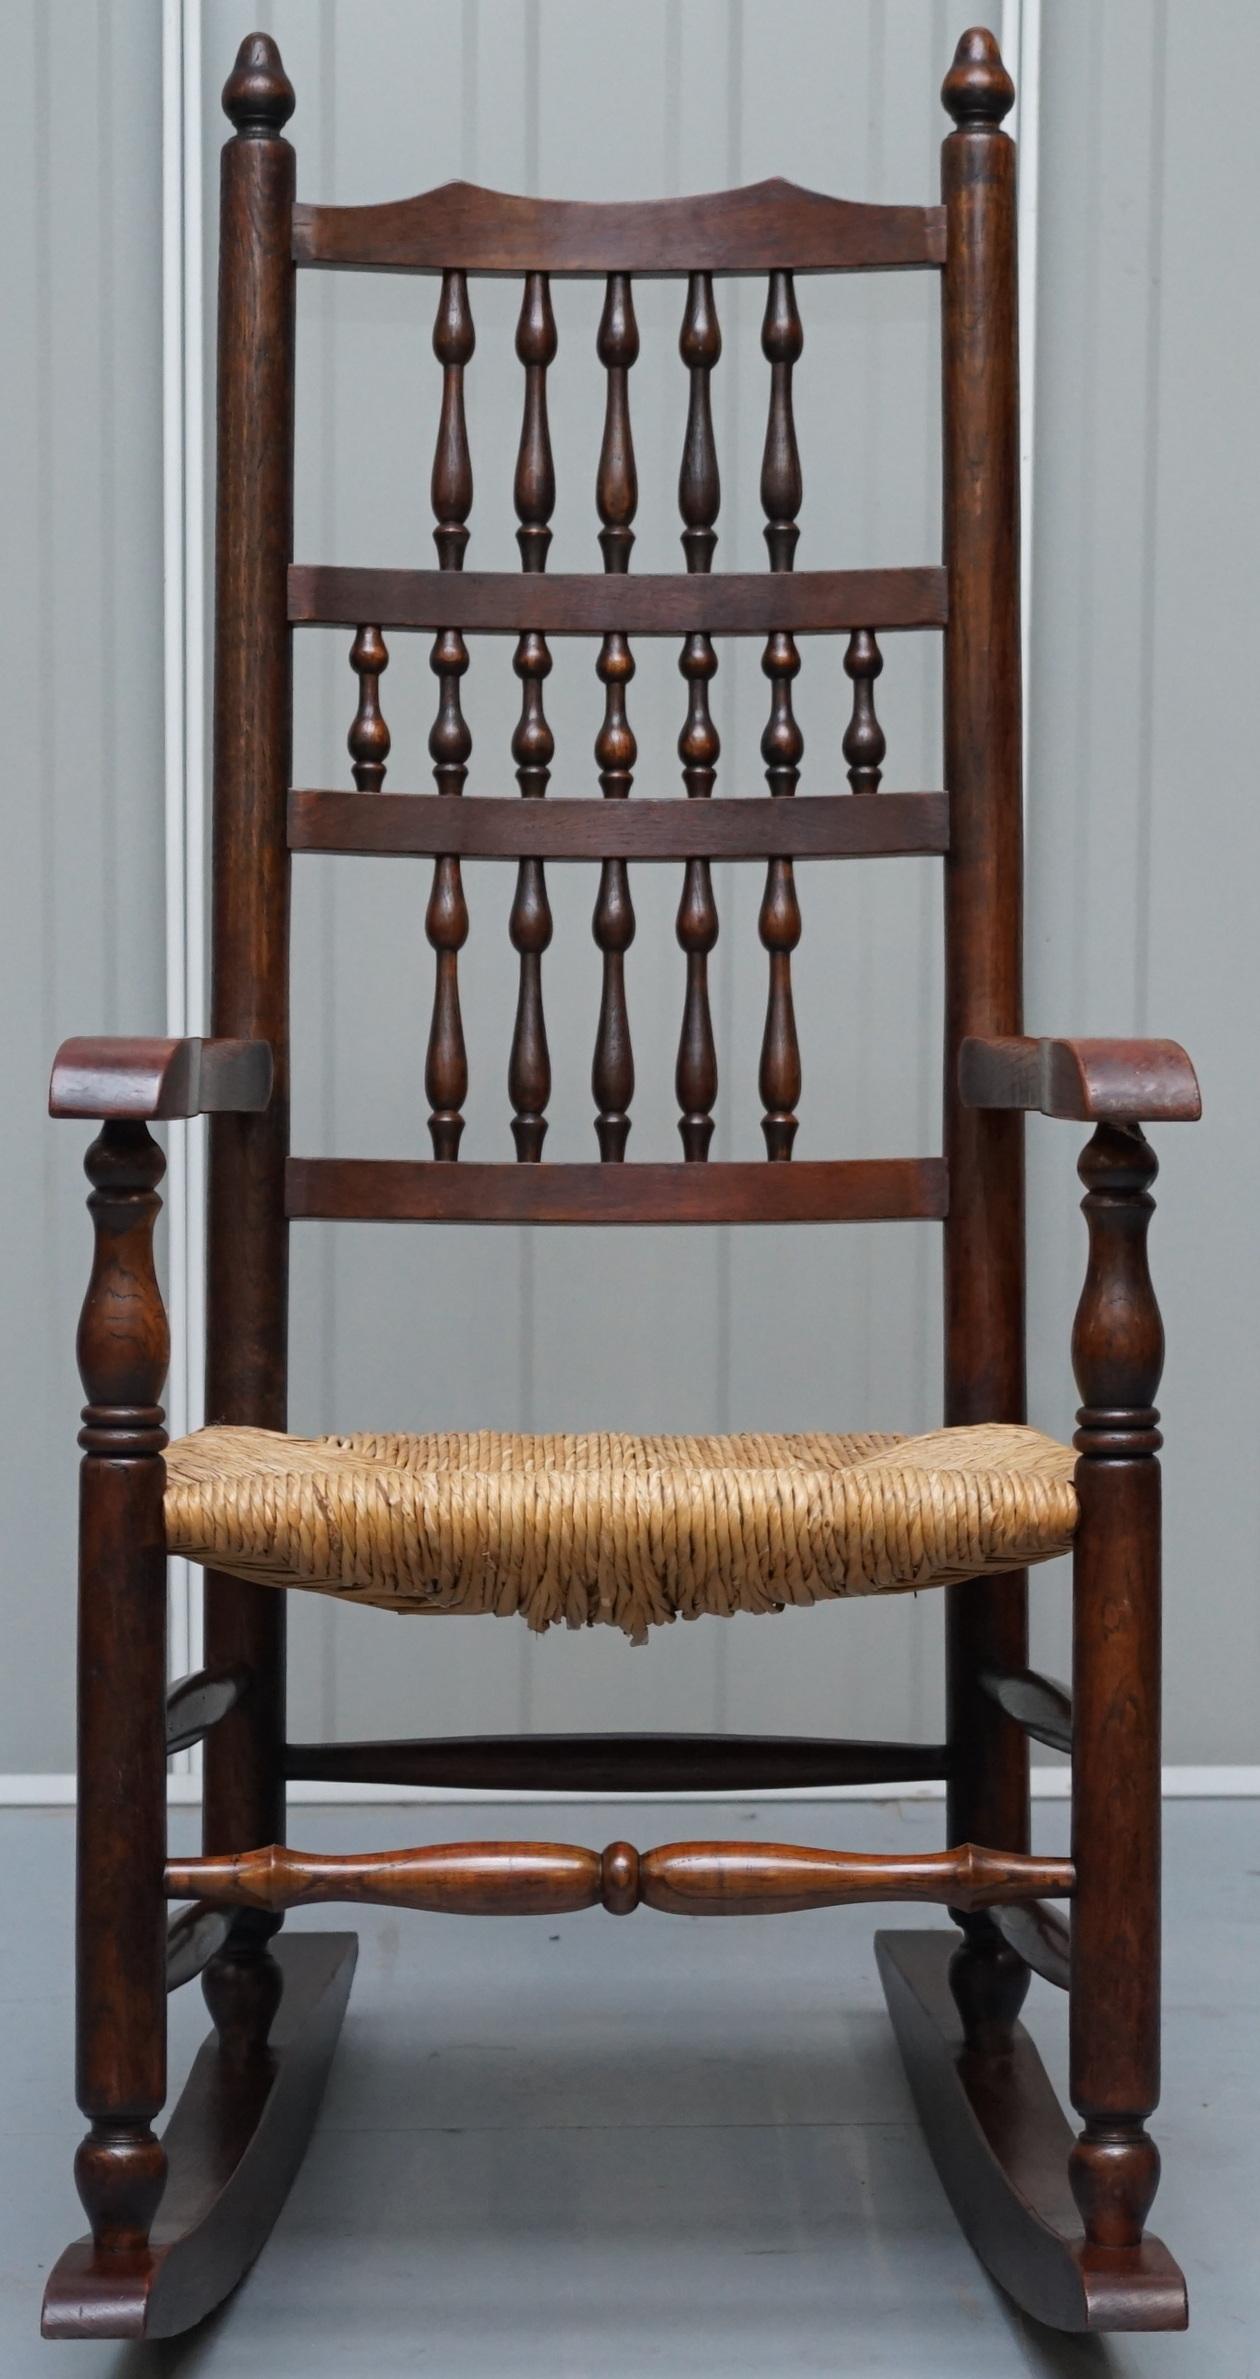 We are delighted to offer for sale this lovely late Victorian Elm rocking chair made in the William Morris Sussex chair style

A very decorative and comfortable rocking chair, the frame is light elm and it has the original woven seat base

We